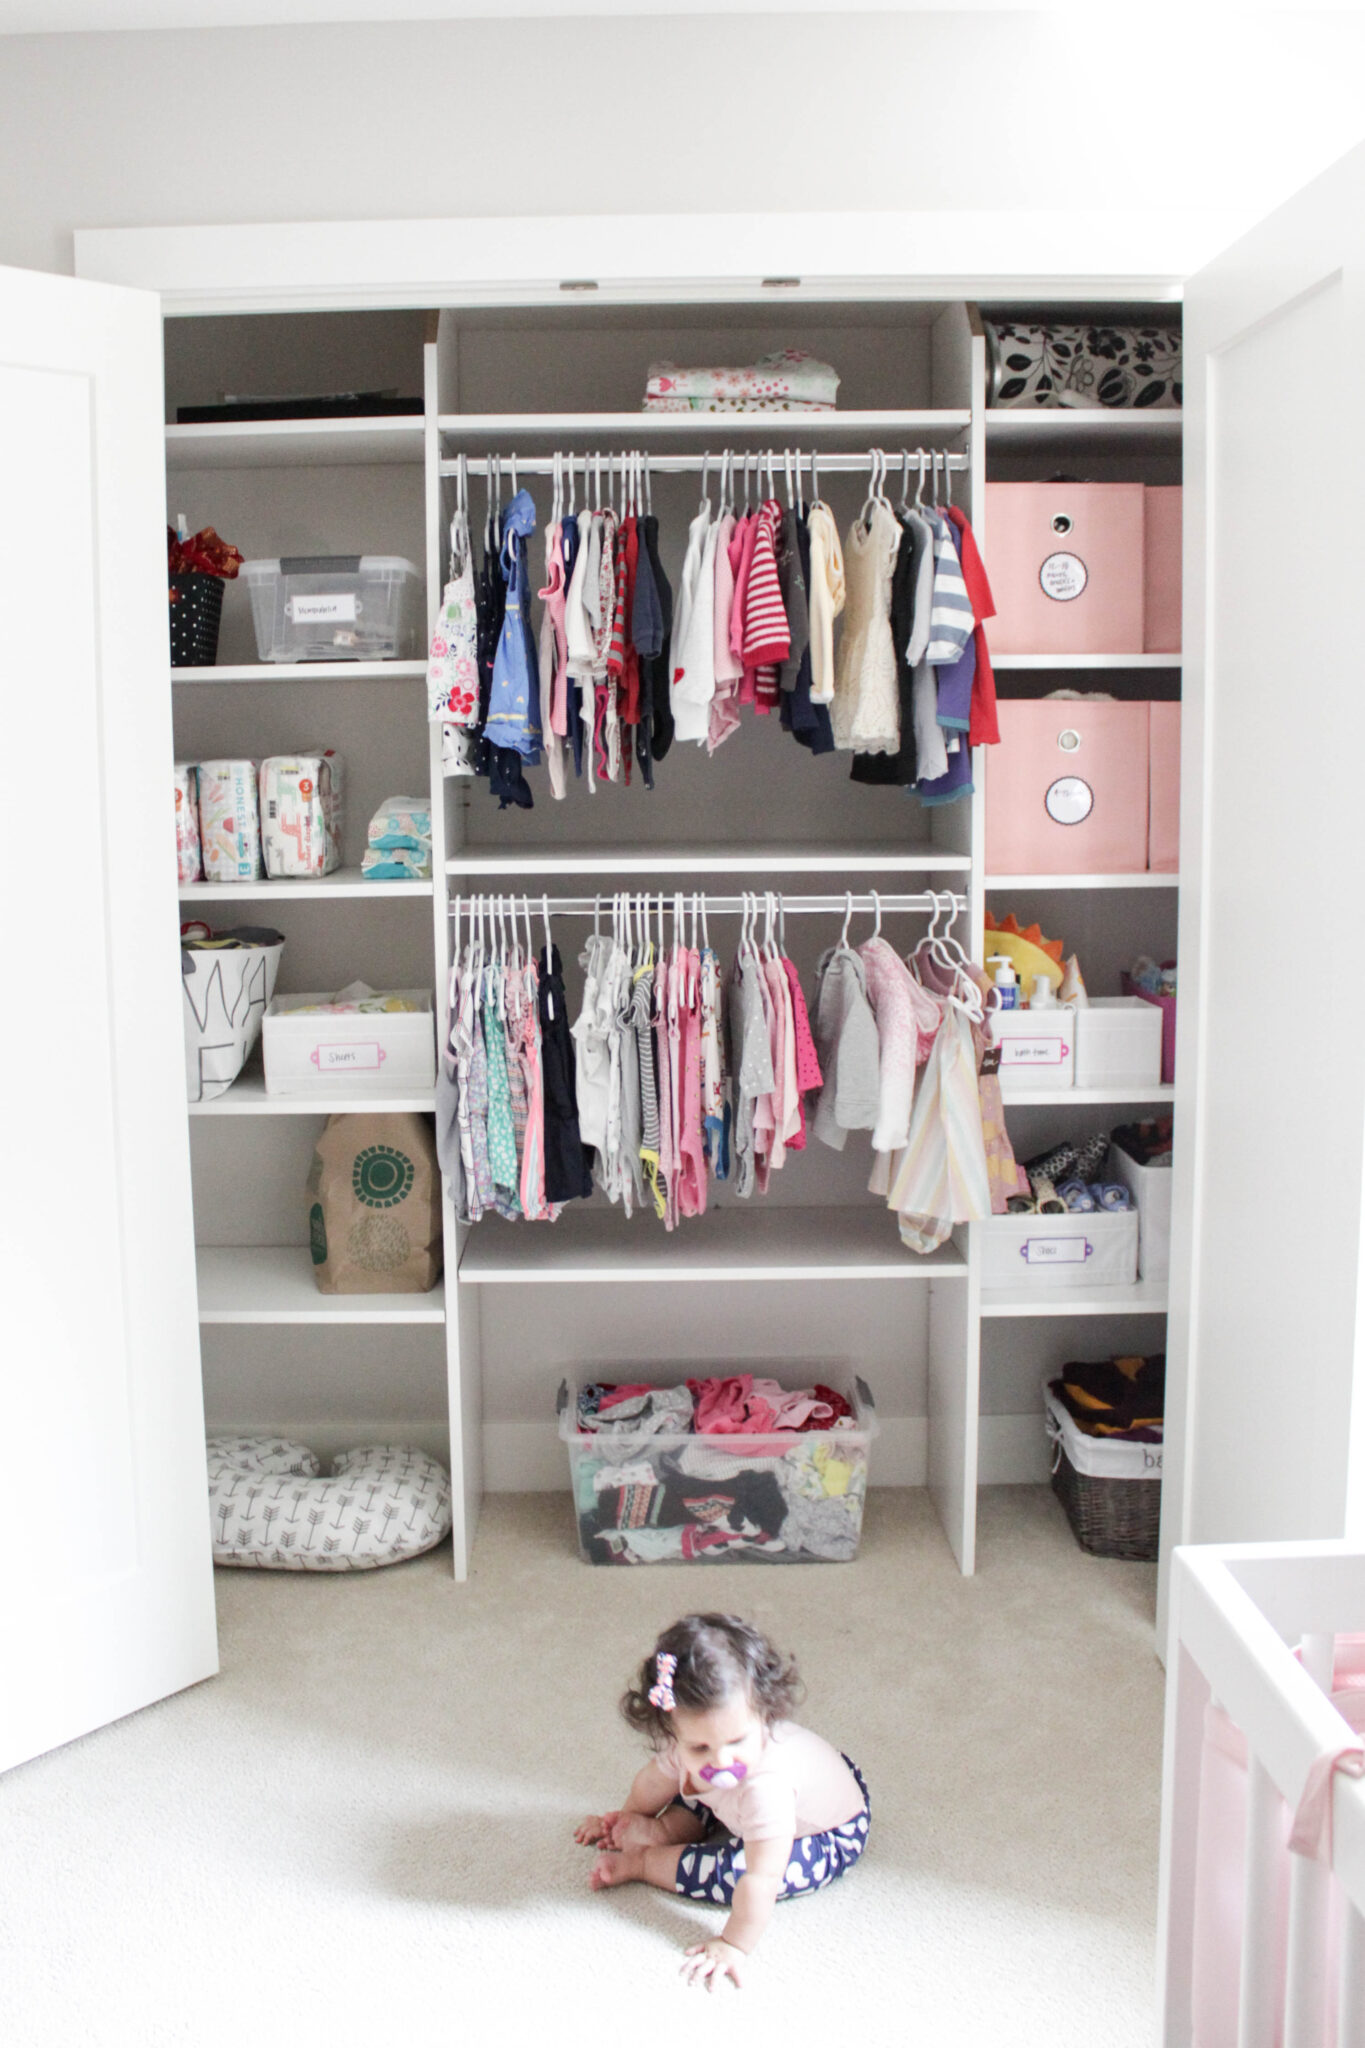 Genius Closet Organizing Ideas From Target's New Made by Design Line